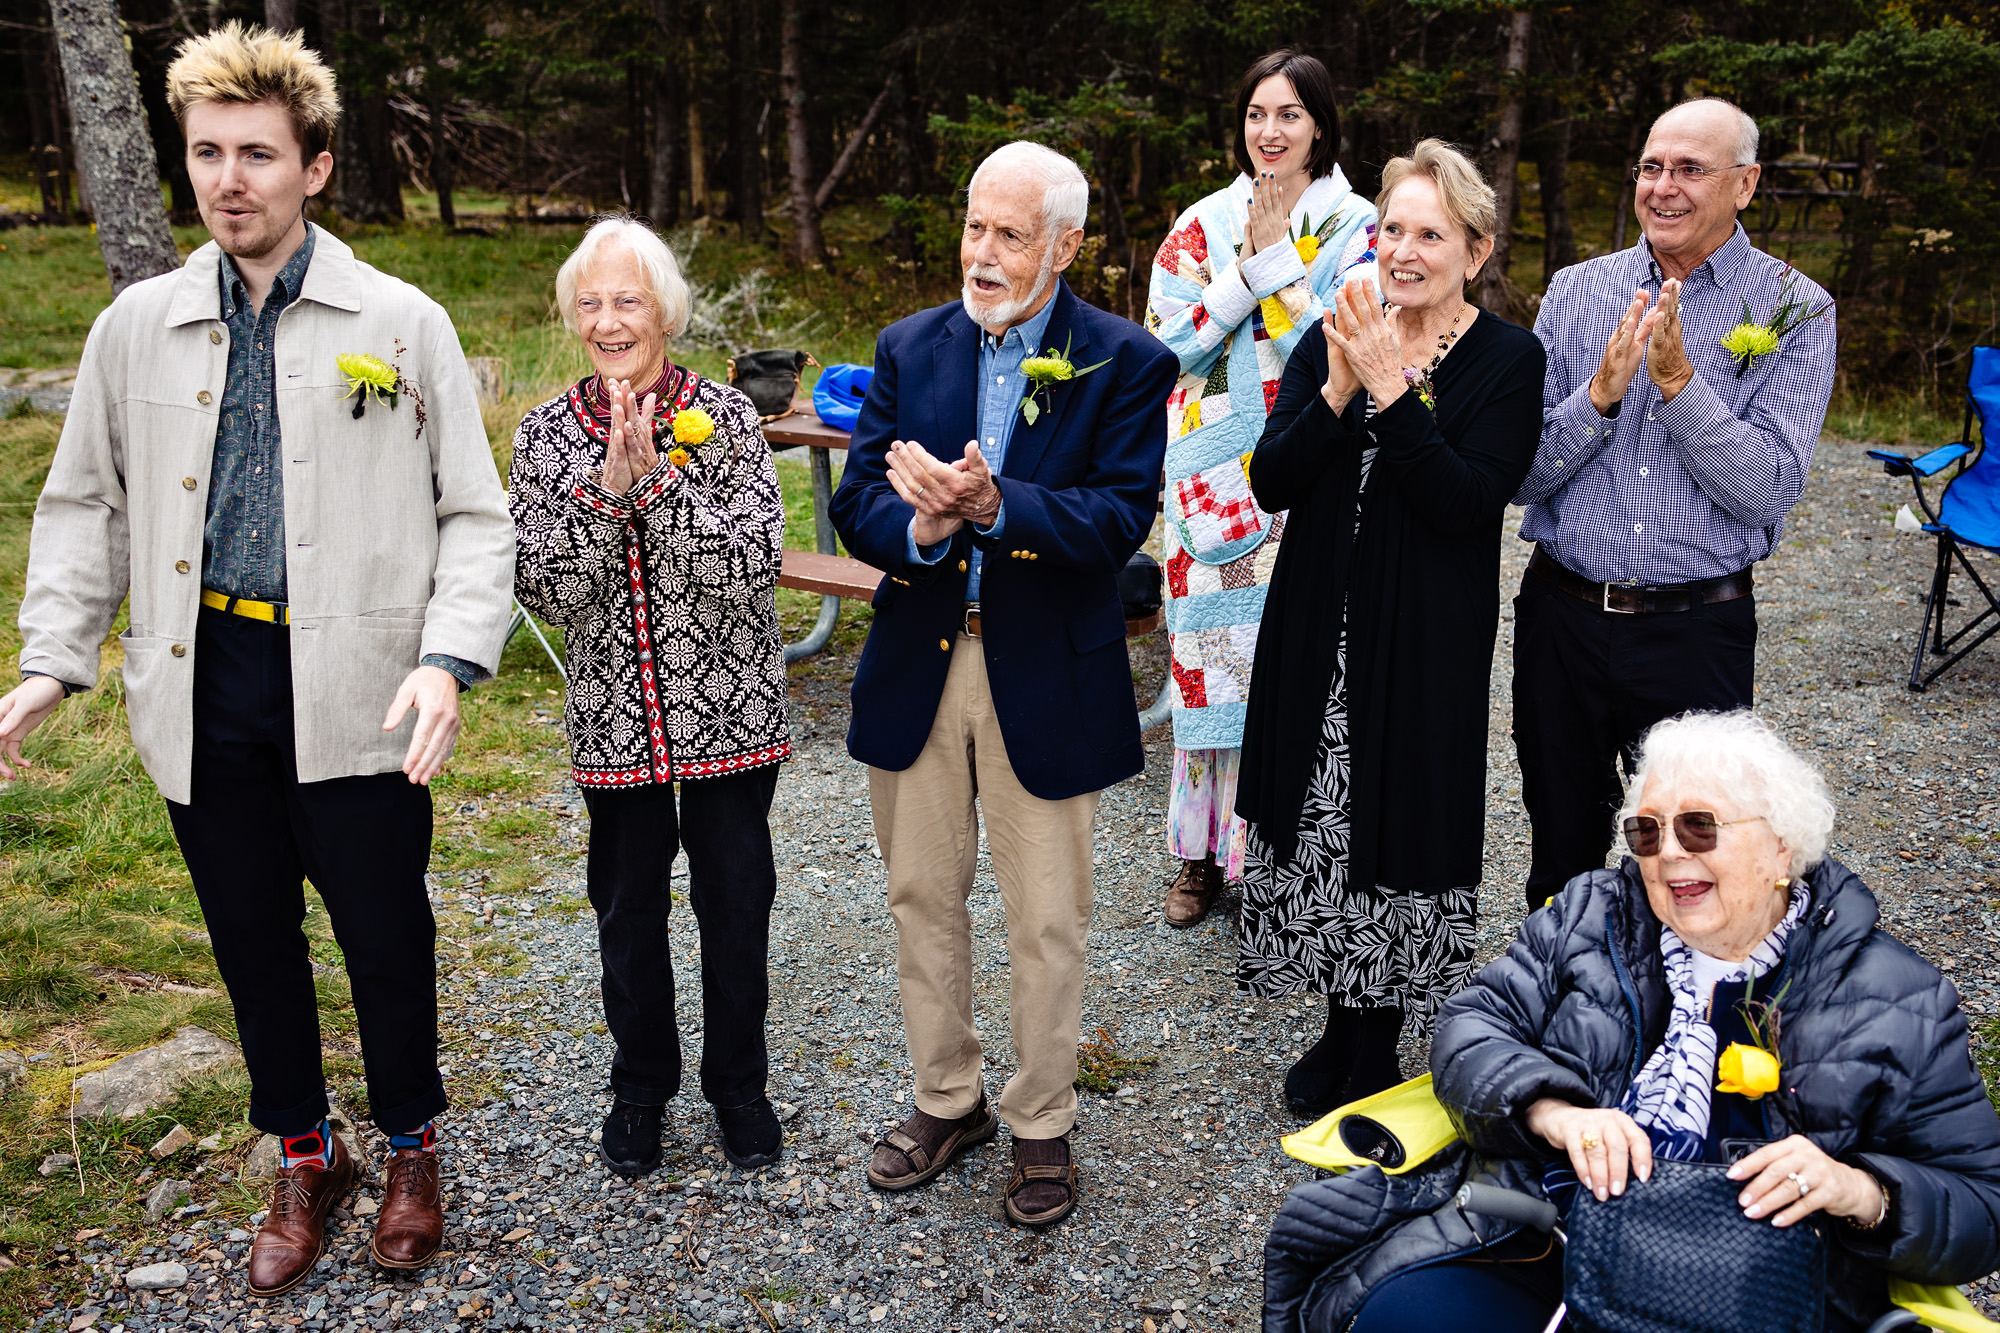 The families of Catt and Cody were emotional during Catt and Cody's ceremony at Seawall in Acadia